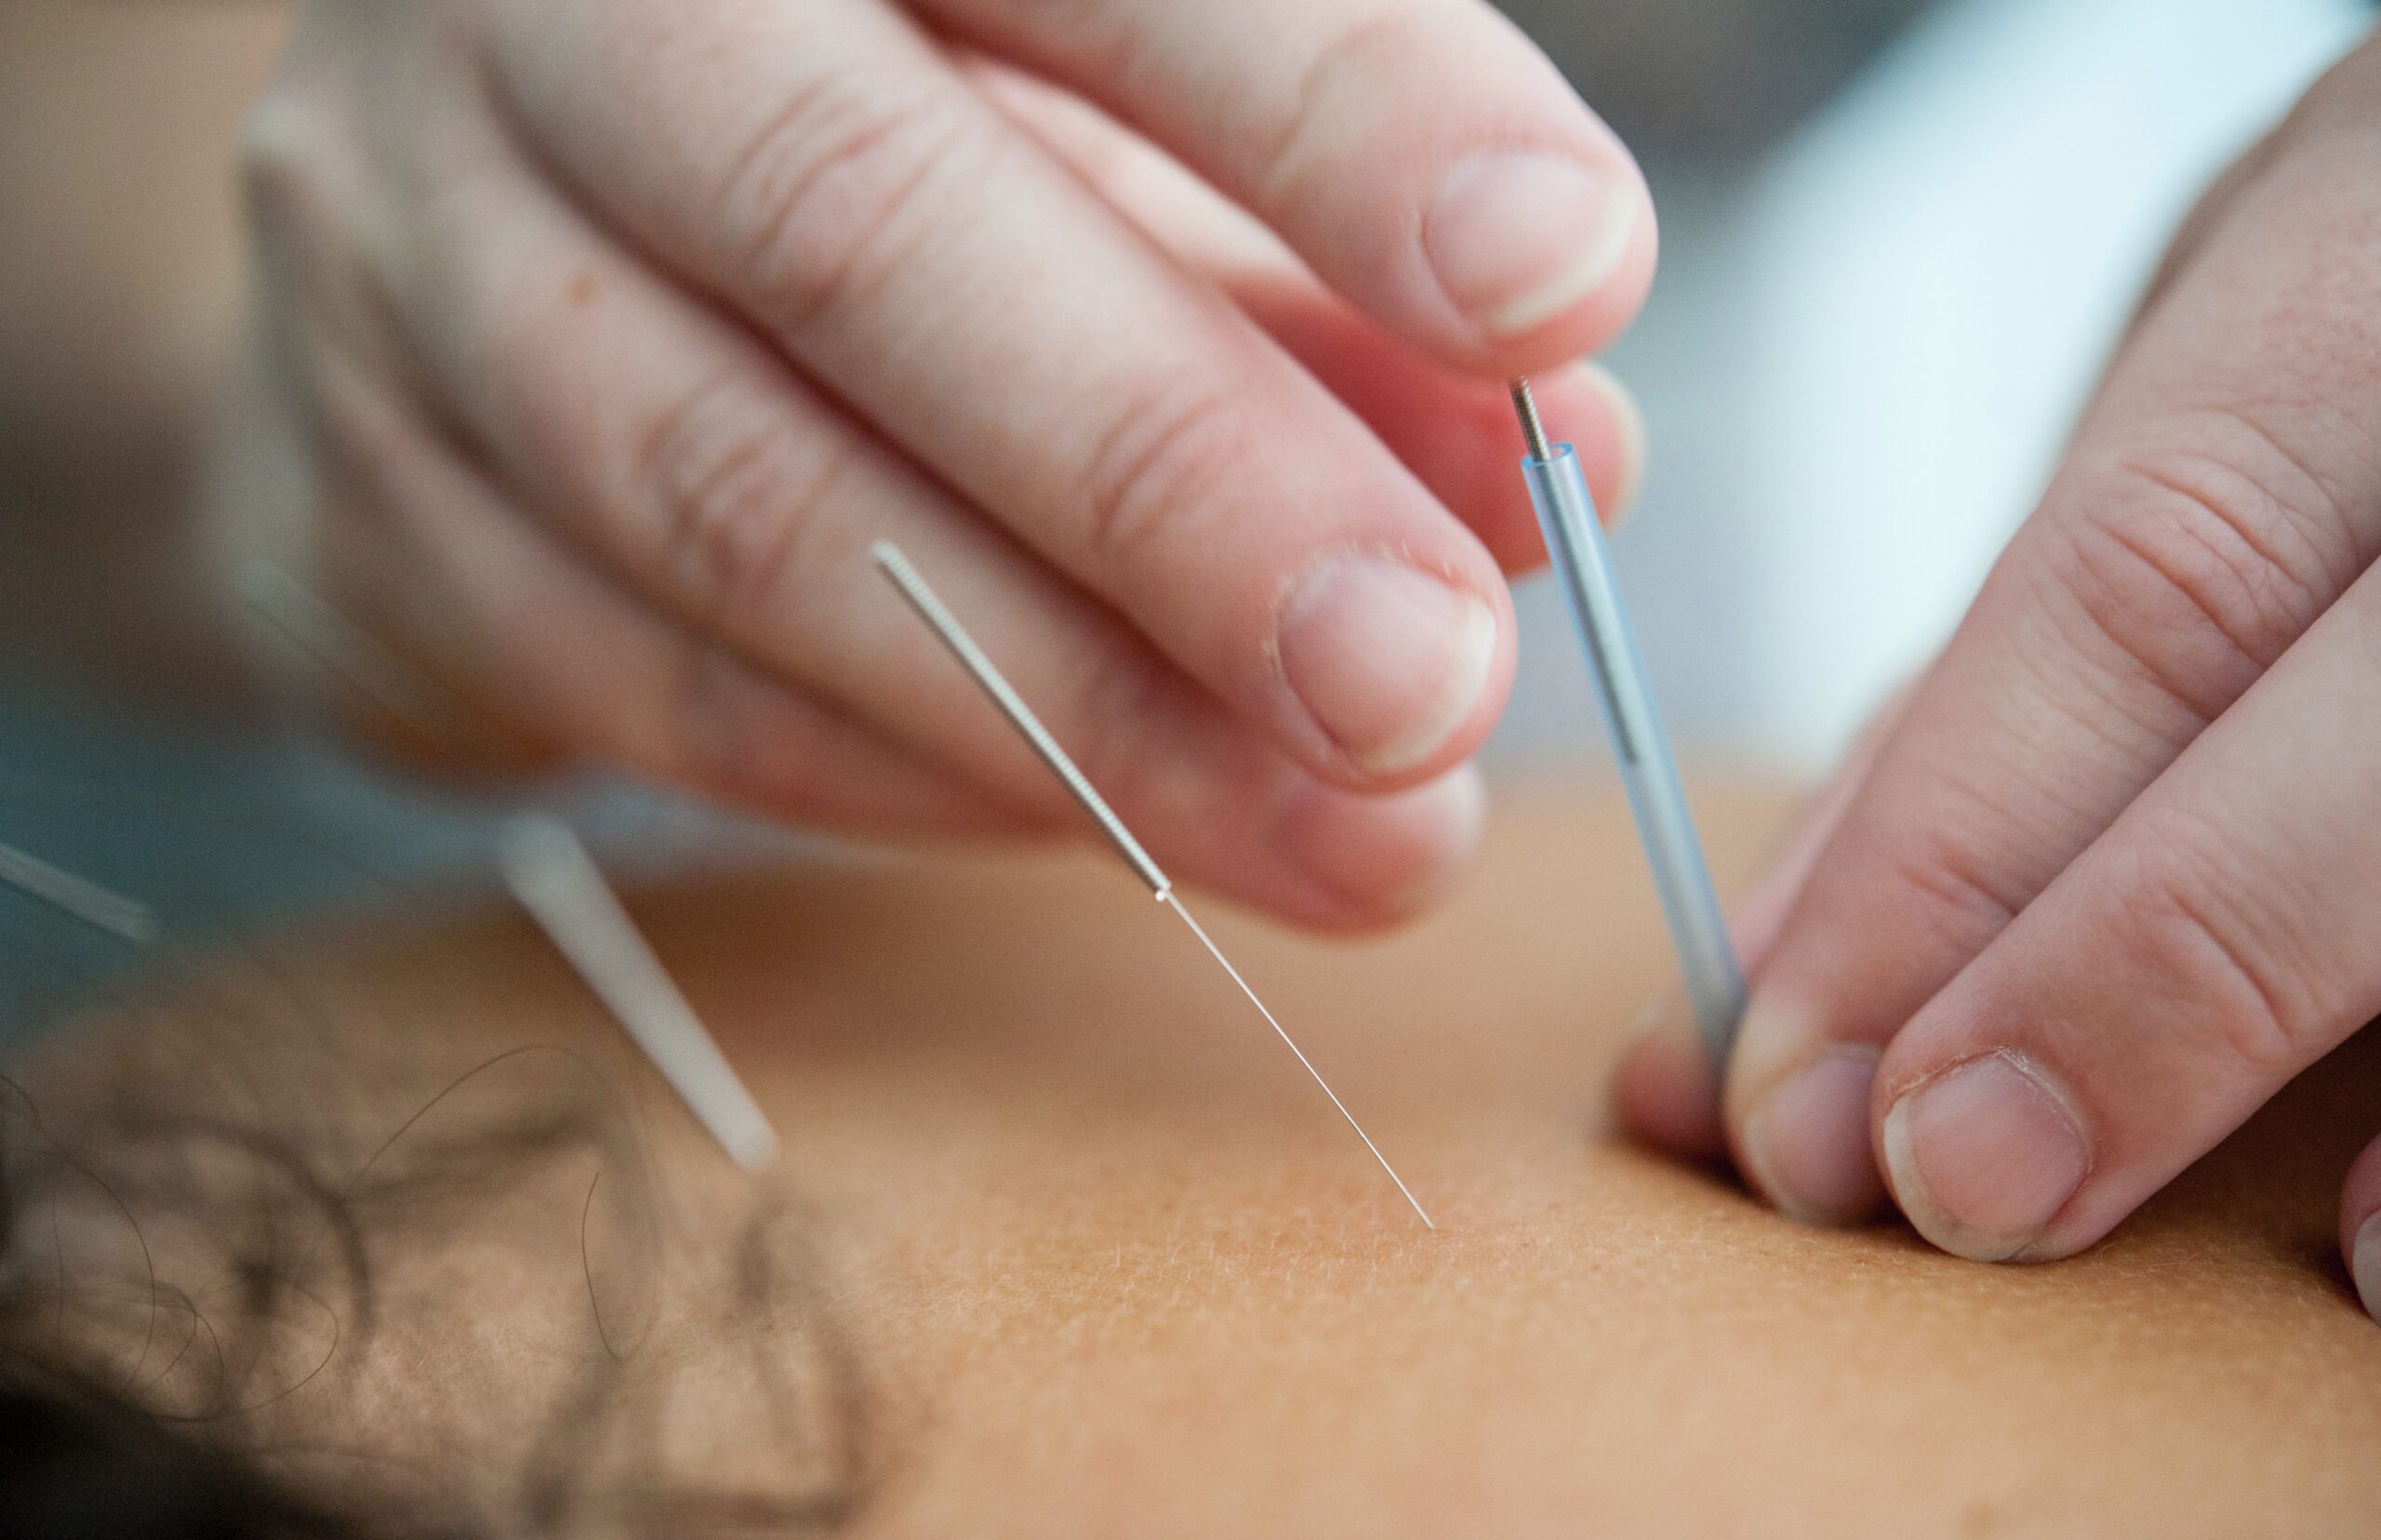 Placing acupuncture needles on patient's back.